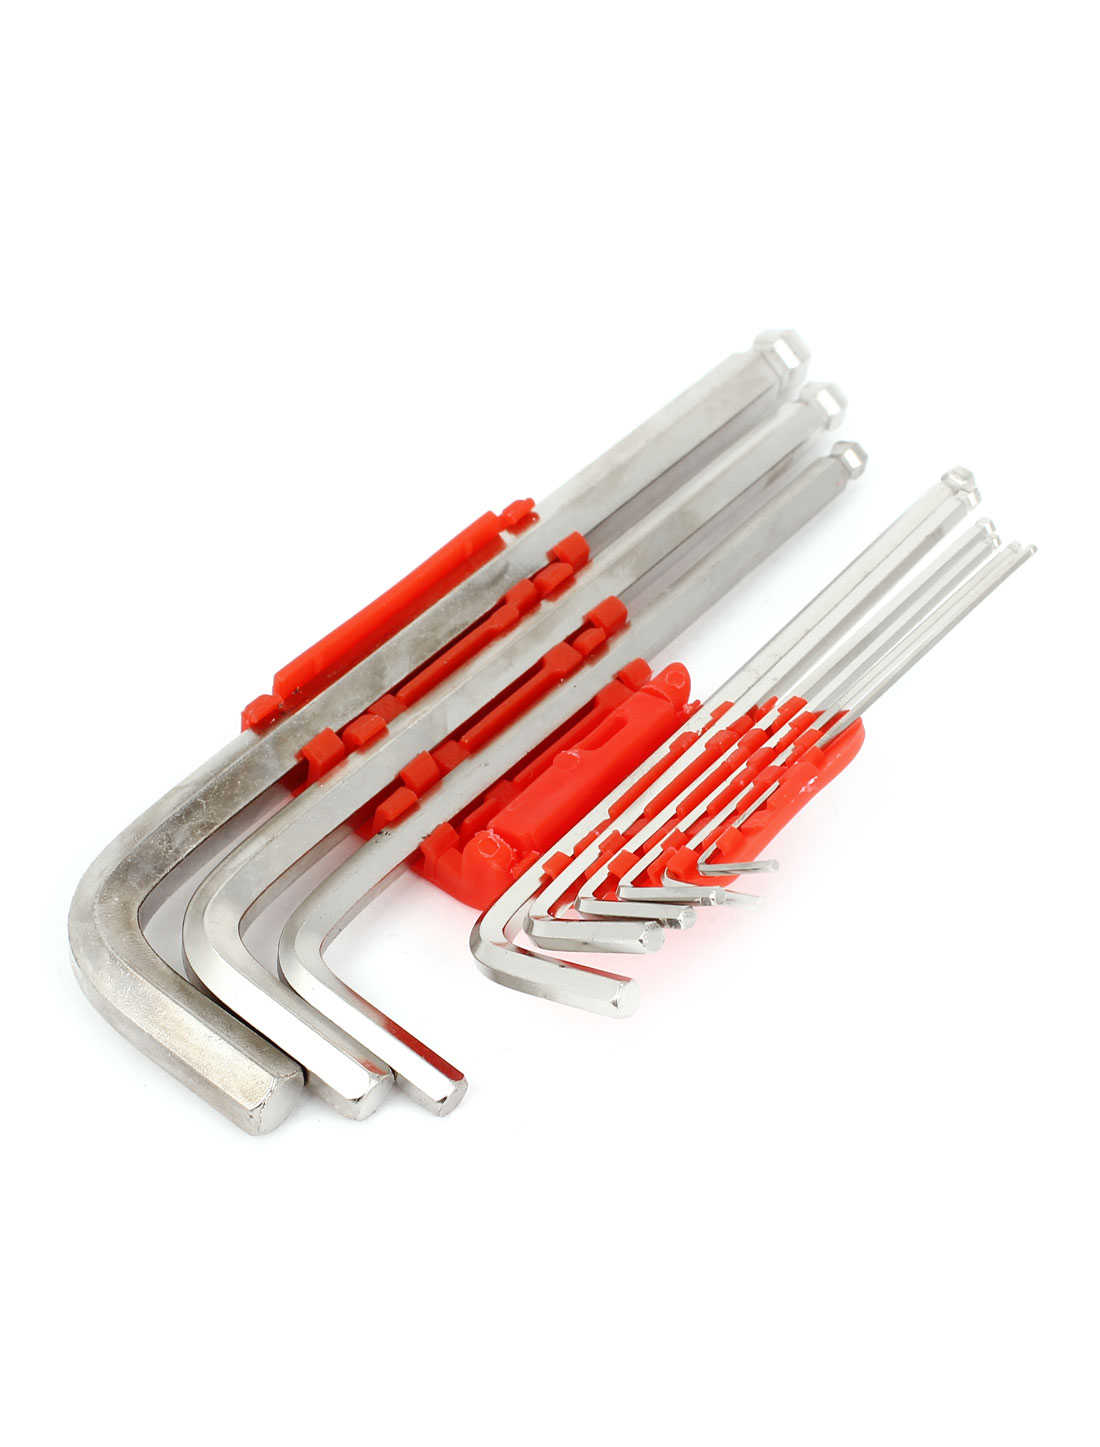 Unique Bargains 9pcs 1.5mm-10mm L Shaped Ball Point Metric Hex Key Wrench Set Hand Tool Hardware